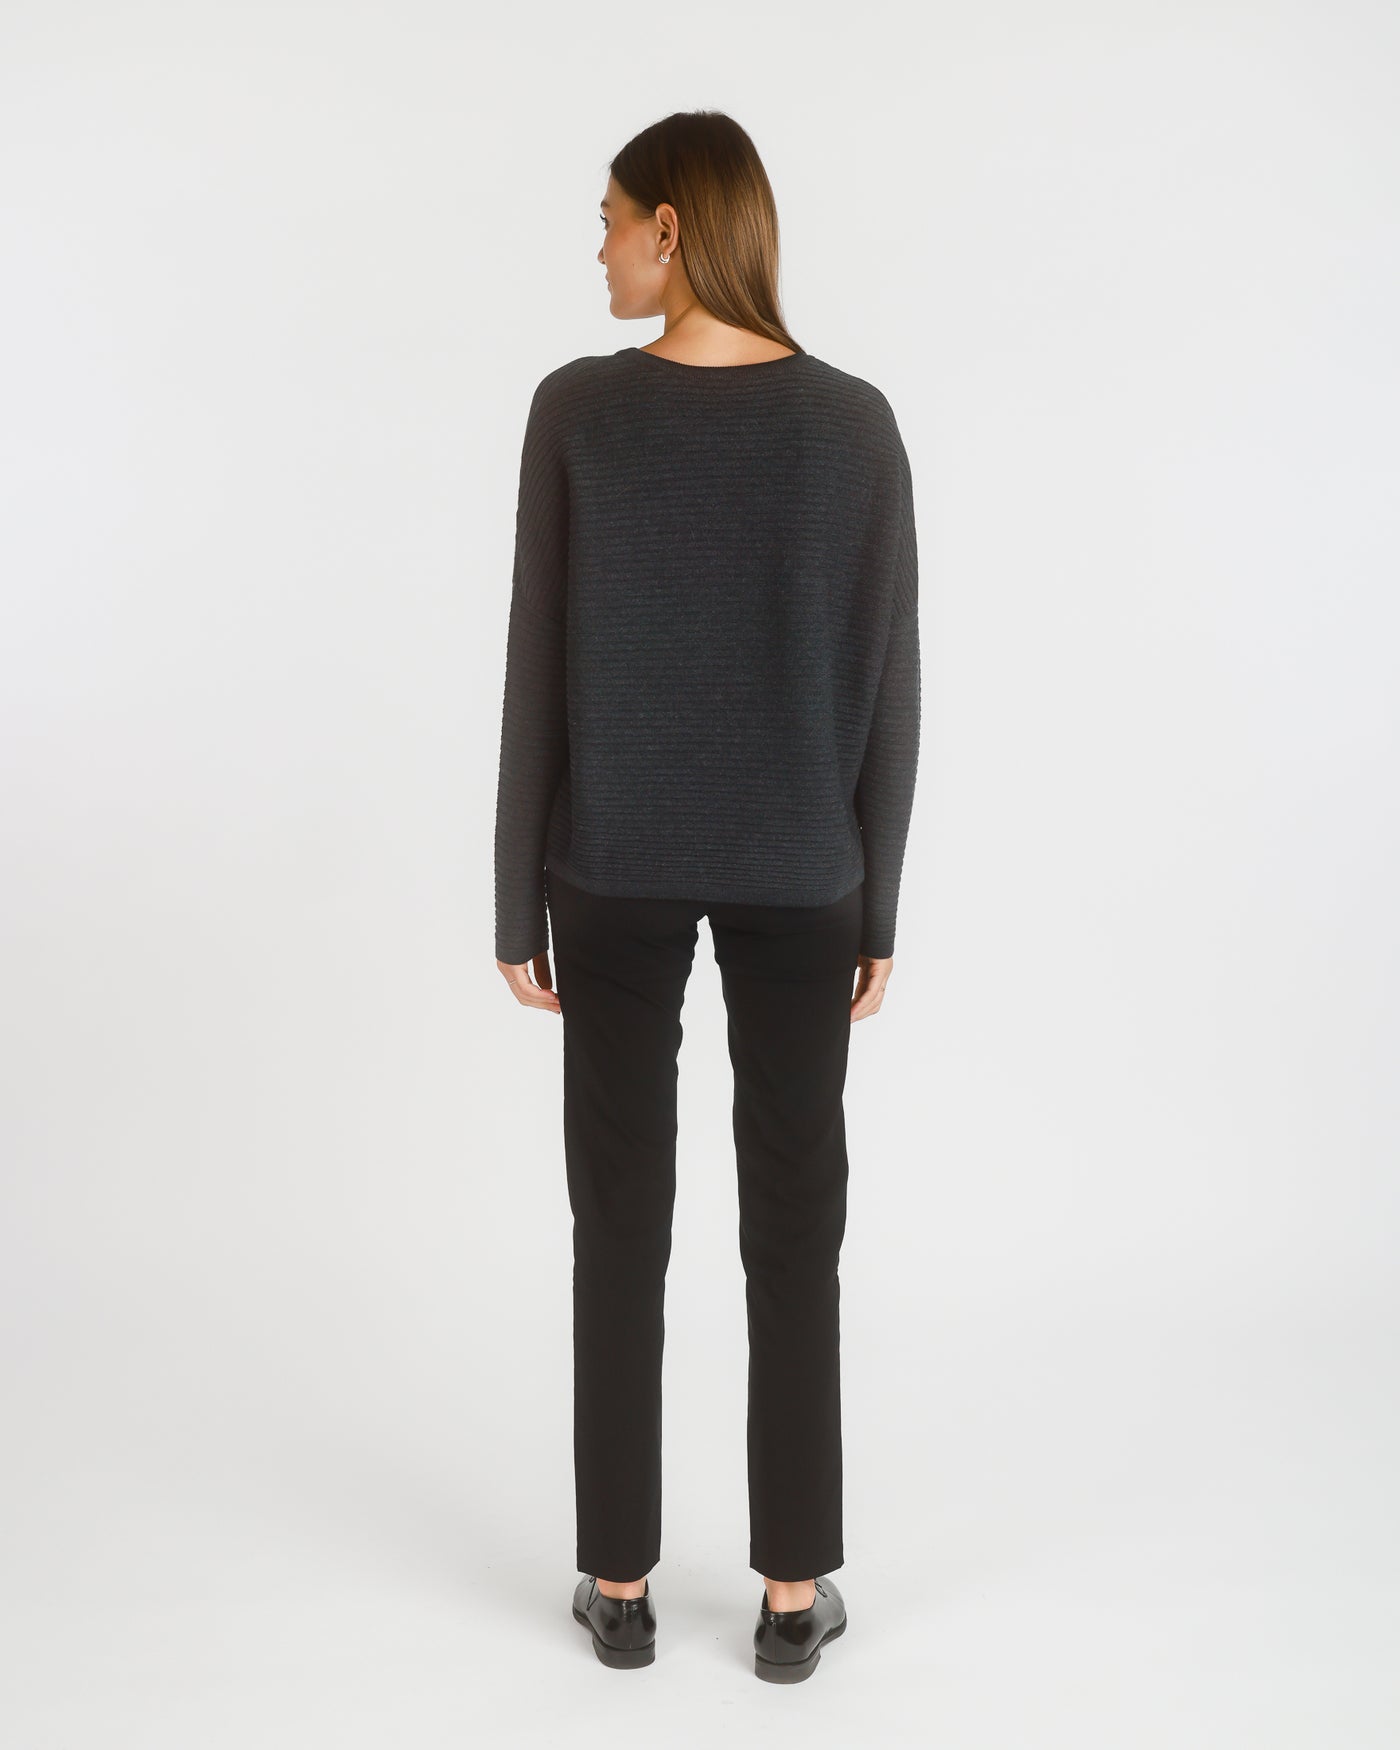 Muse Merino Ribbed Sweater. Charcoal. One Size